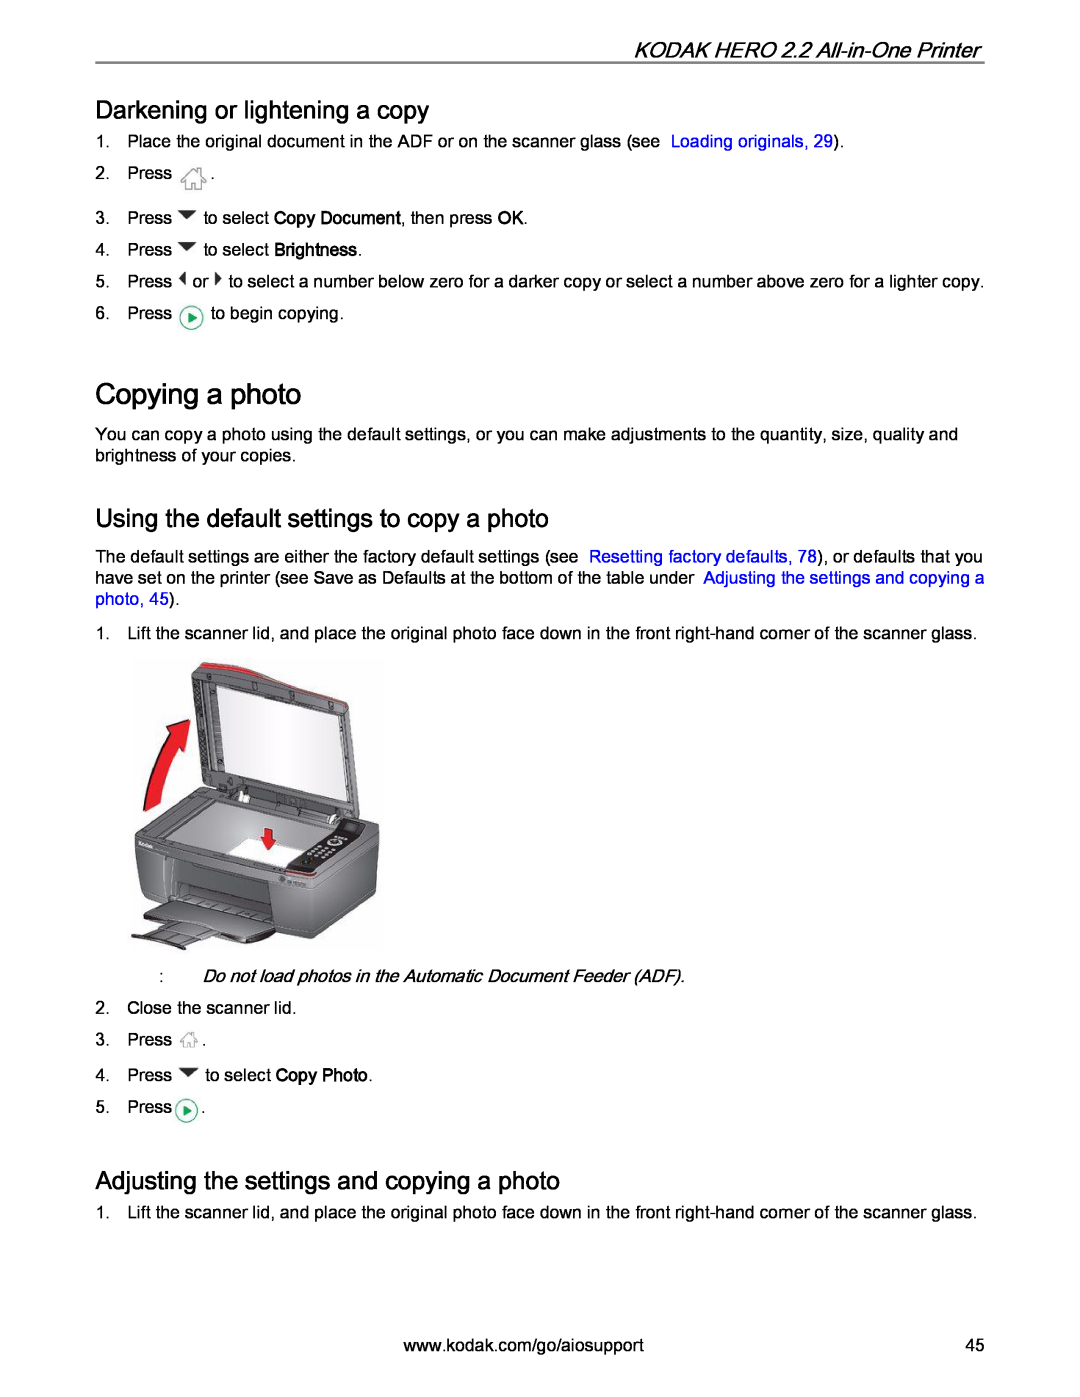 Kodak 2.2 manual Copying a photo, Darkening or lightening a copy, Using the default settings to copy a photo 